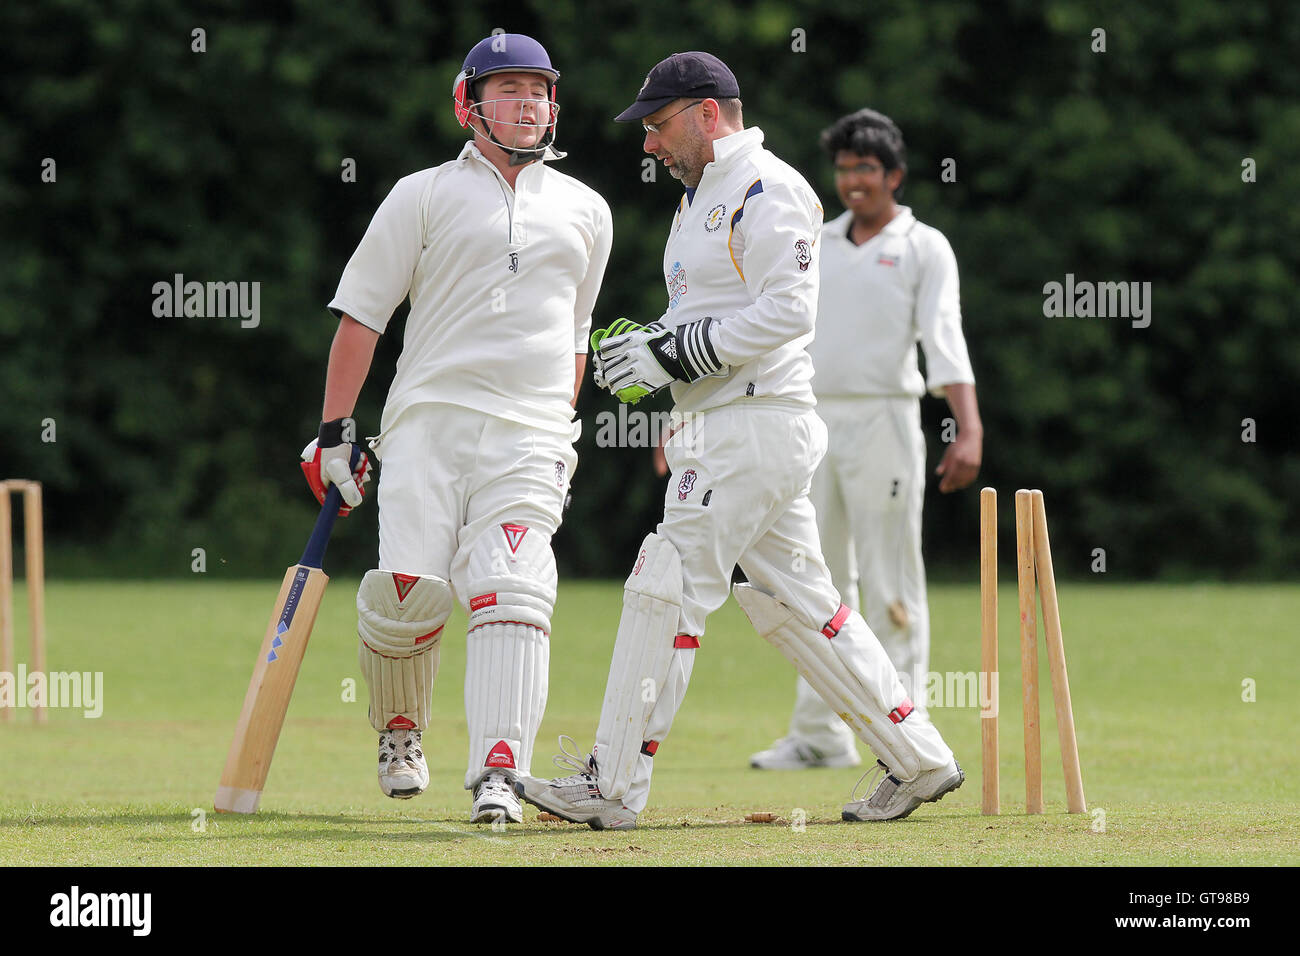 Galleywood batsman Isaacs is run out - Navestock Ardleigh Green CC 2nd XI vs Galleywood CC 2nd XI - Essex Cricket League at Fyfield CC - 25/06/11 Stock Photo